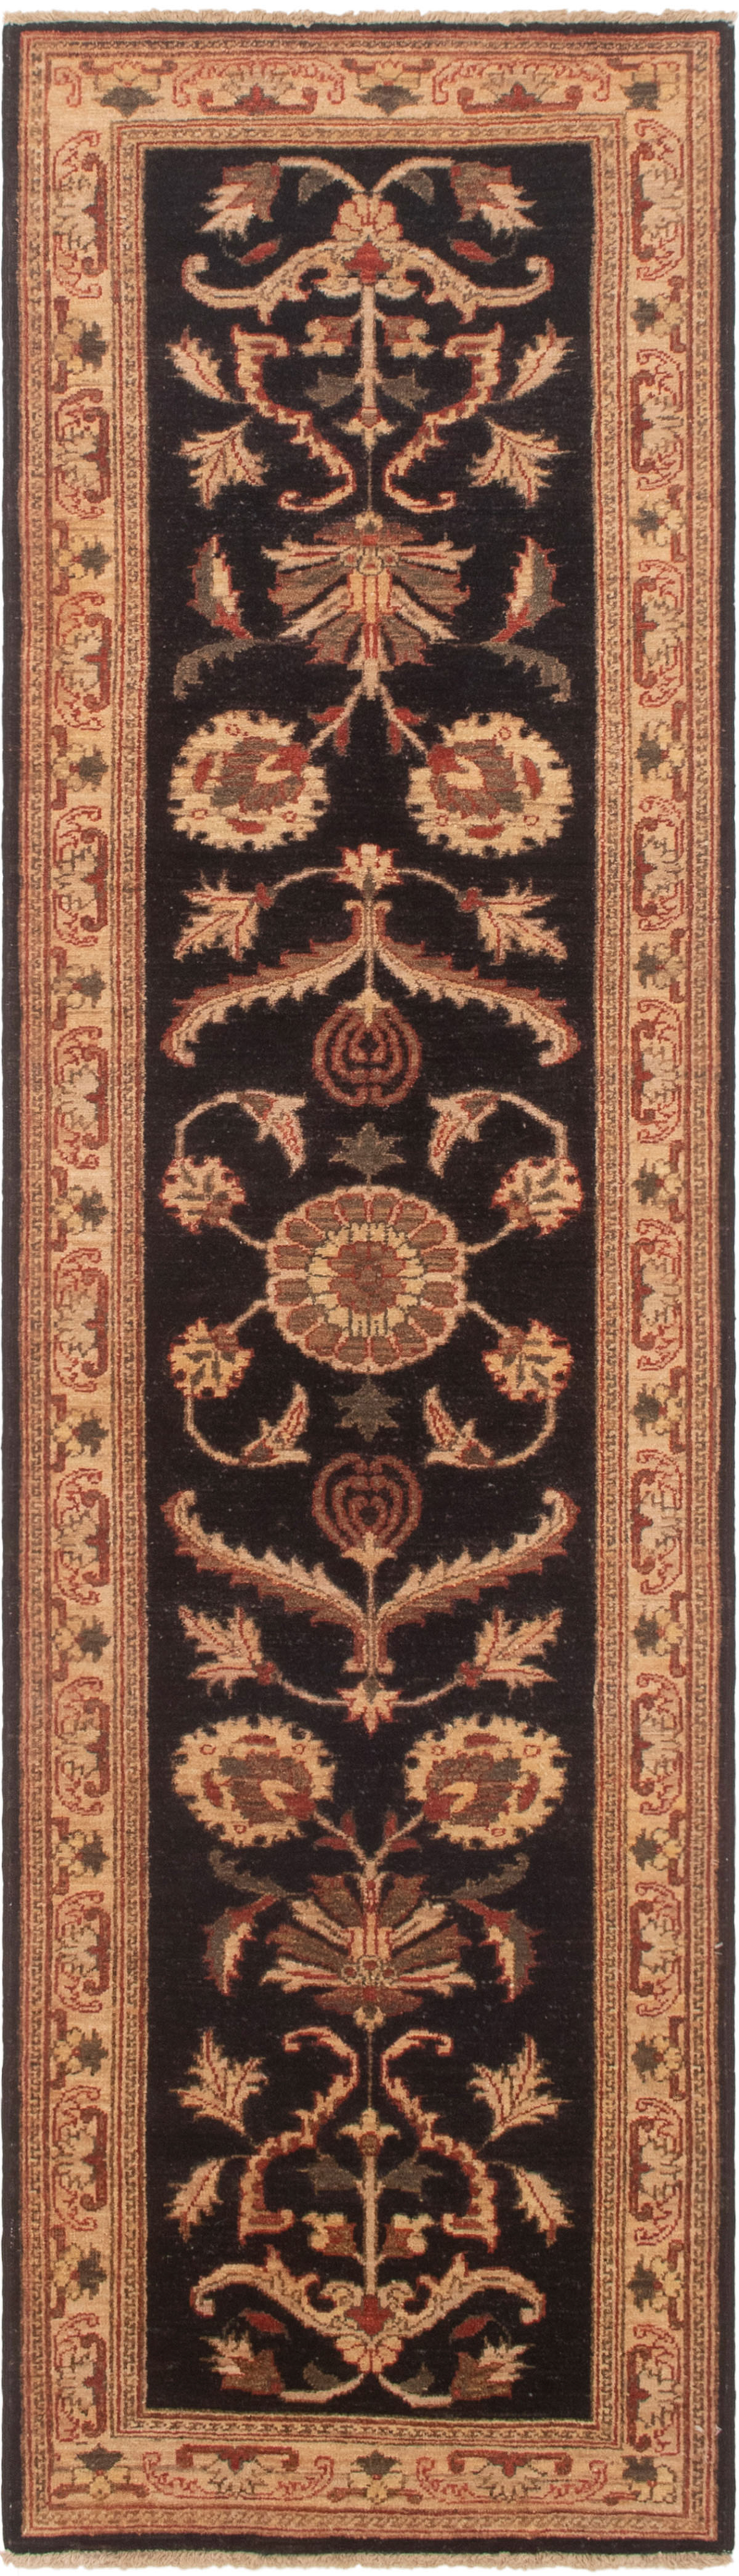 Hand-knotted Chobi Finest Black Wool Rug 2'8" x 9'7" Size: 2'8" x 9'7"  